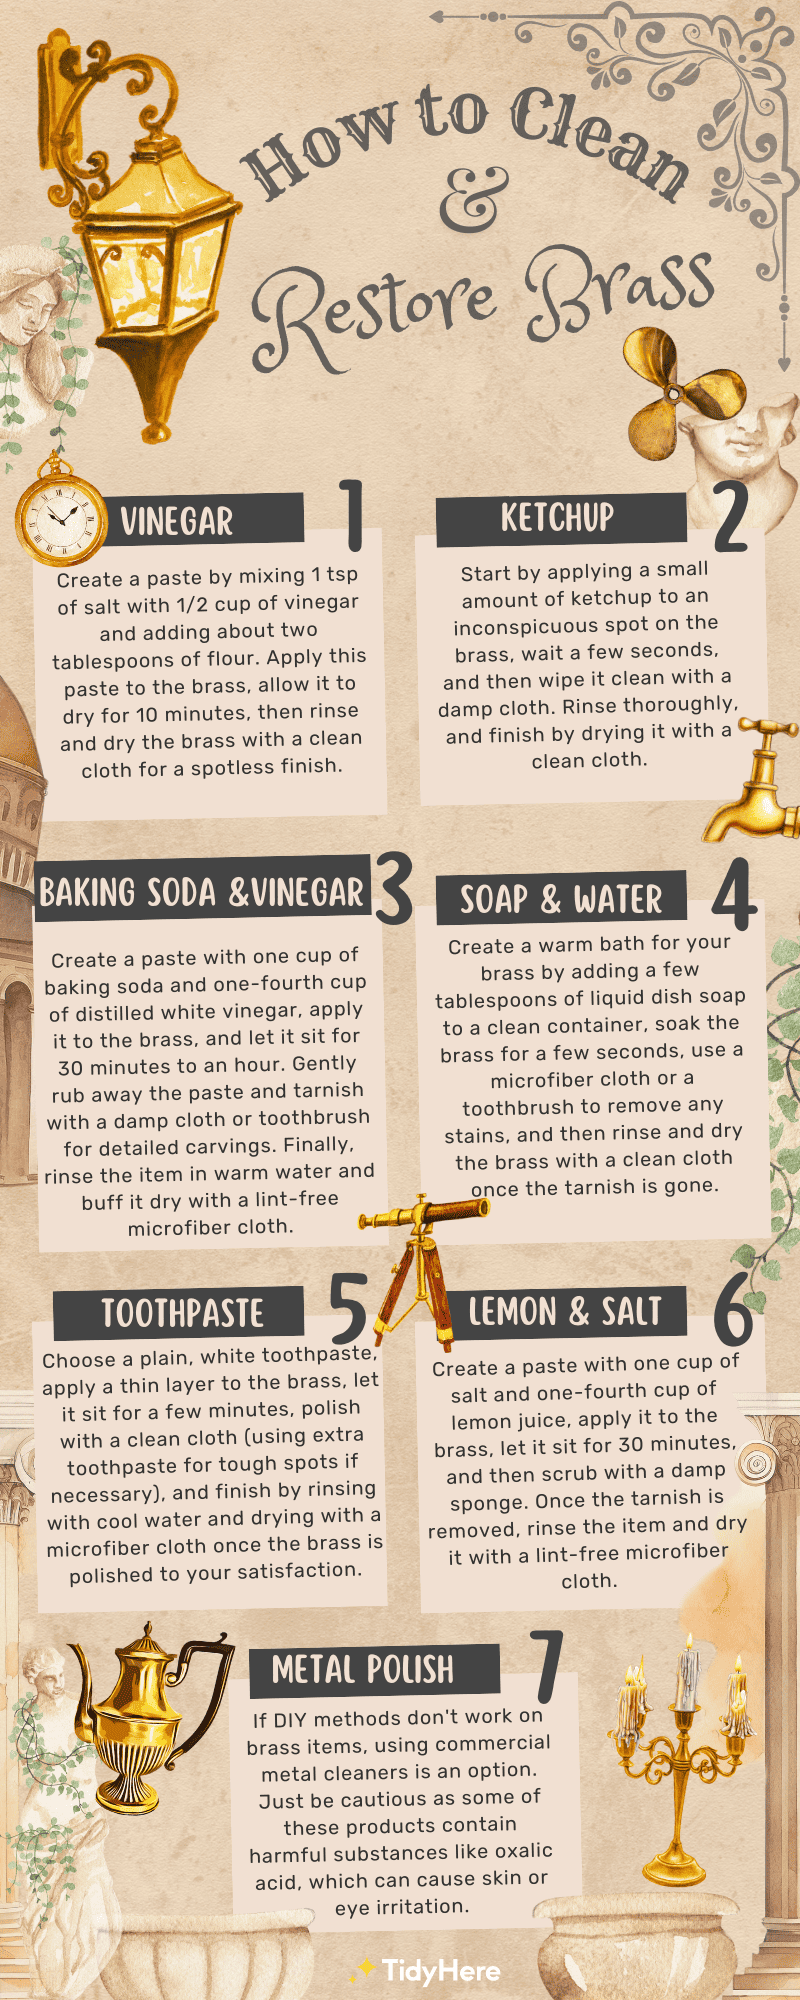 How to Clean and Restore Brass Tidyhere Infographic